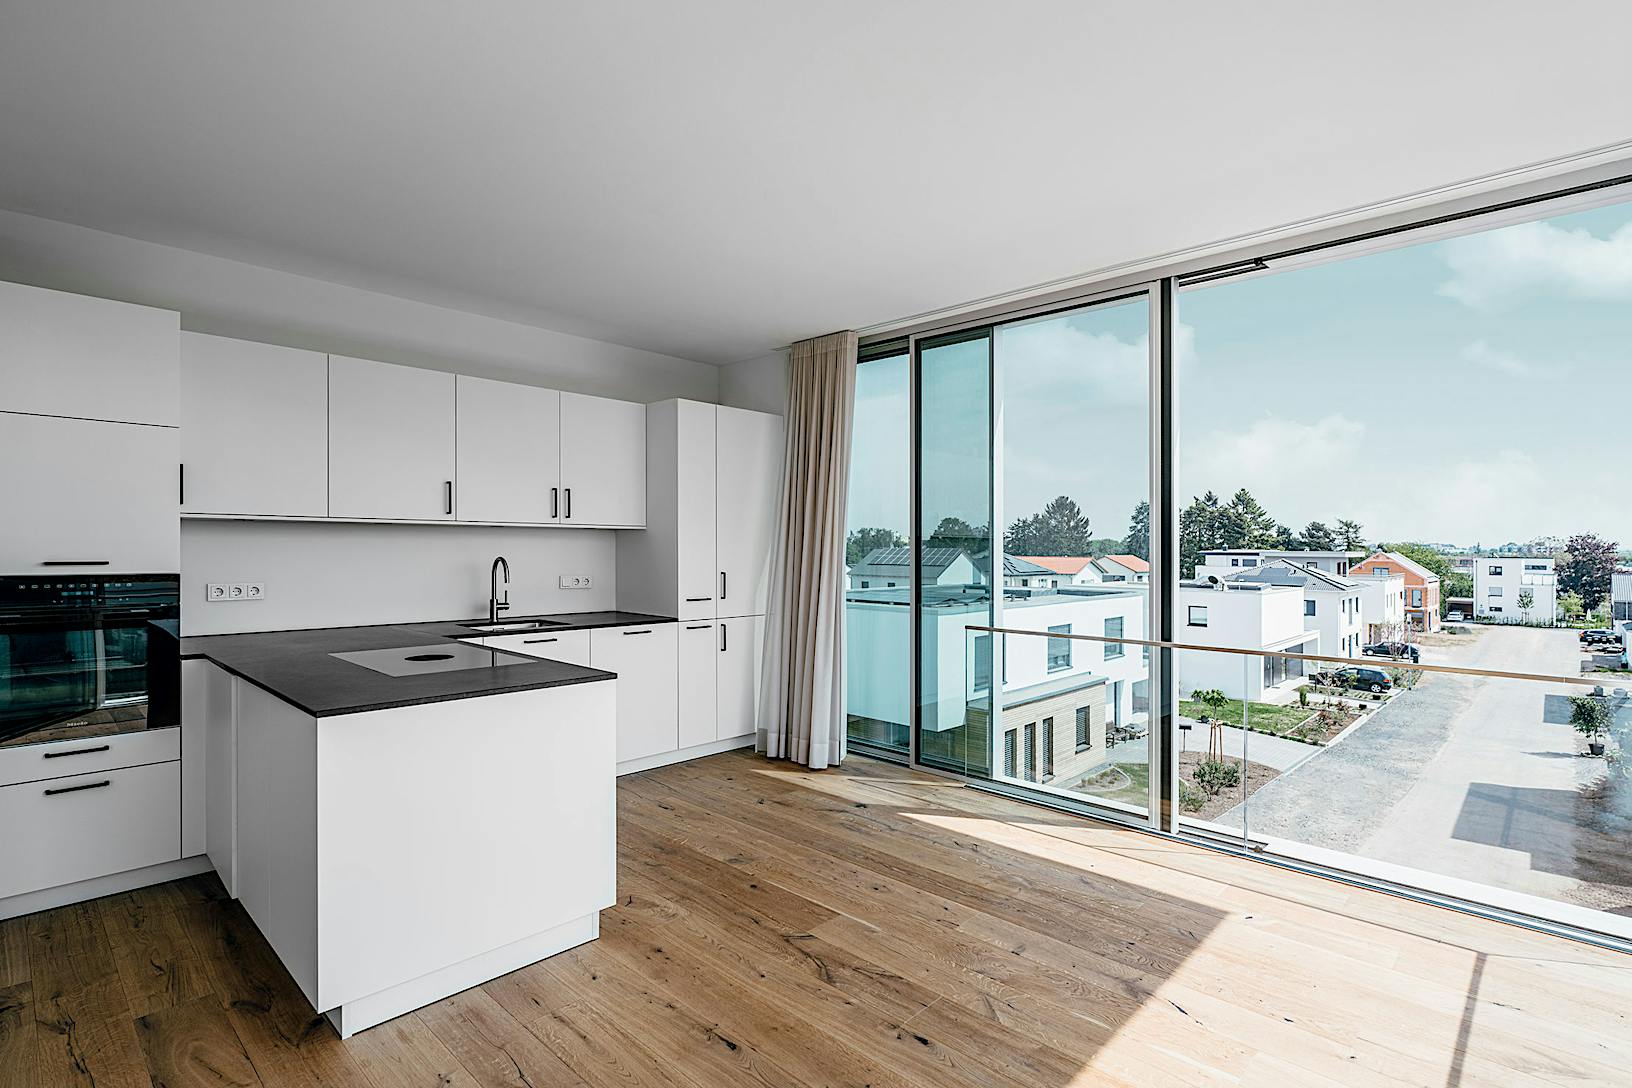 A modern kitchen with a large window overlooking a city, featuring minimal sliding glass walls perfect for condos